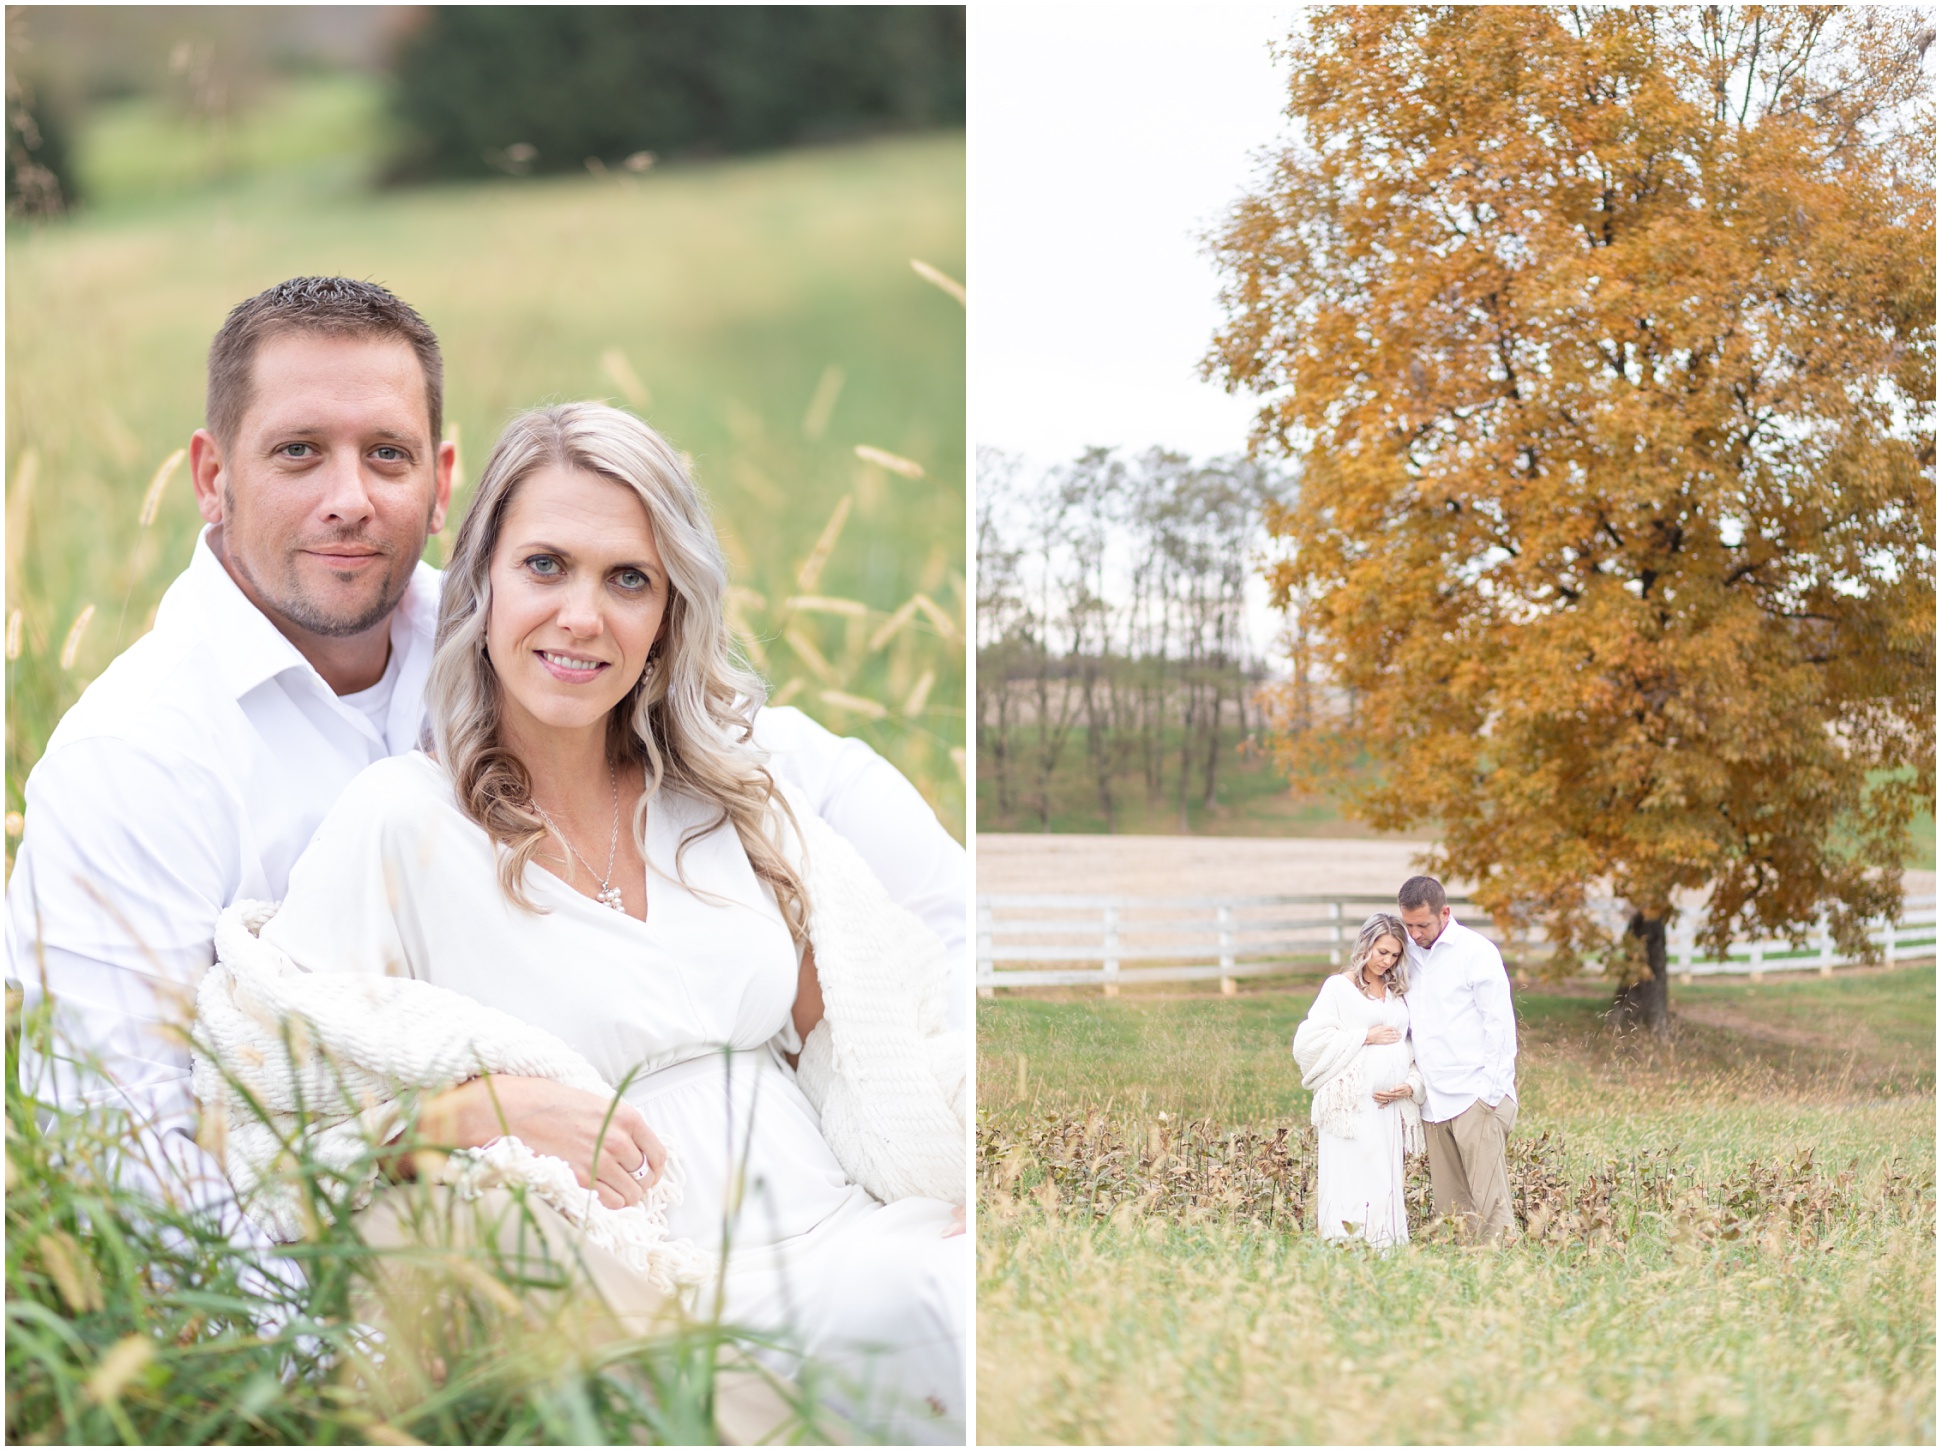 Rebecca and Scott in an open Harford County field and in front of a fall tree.